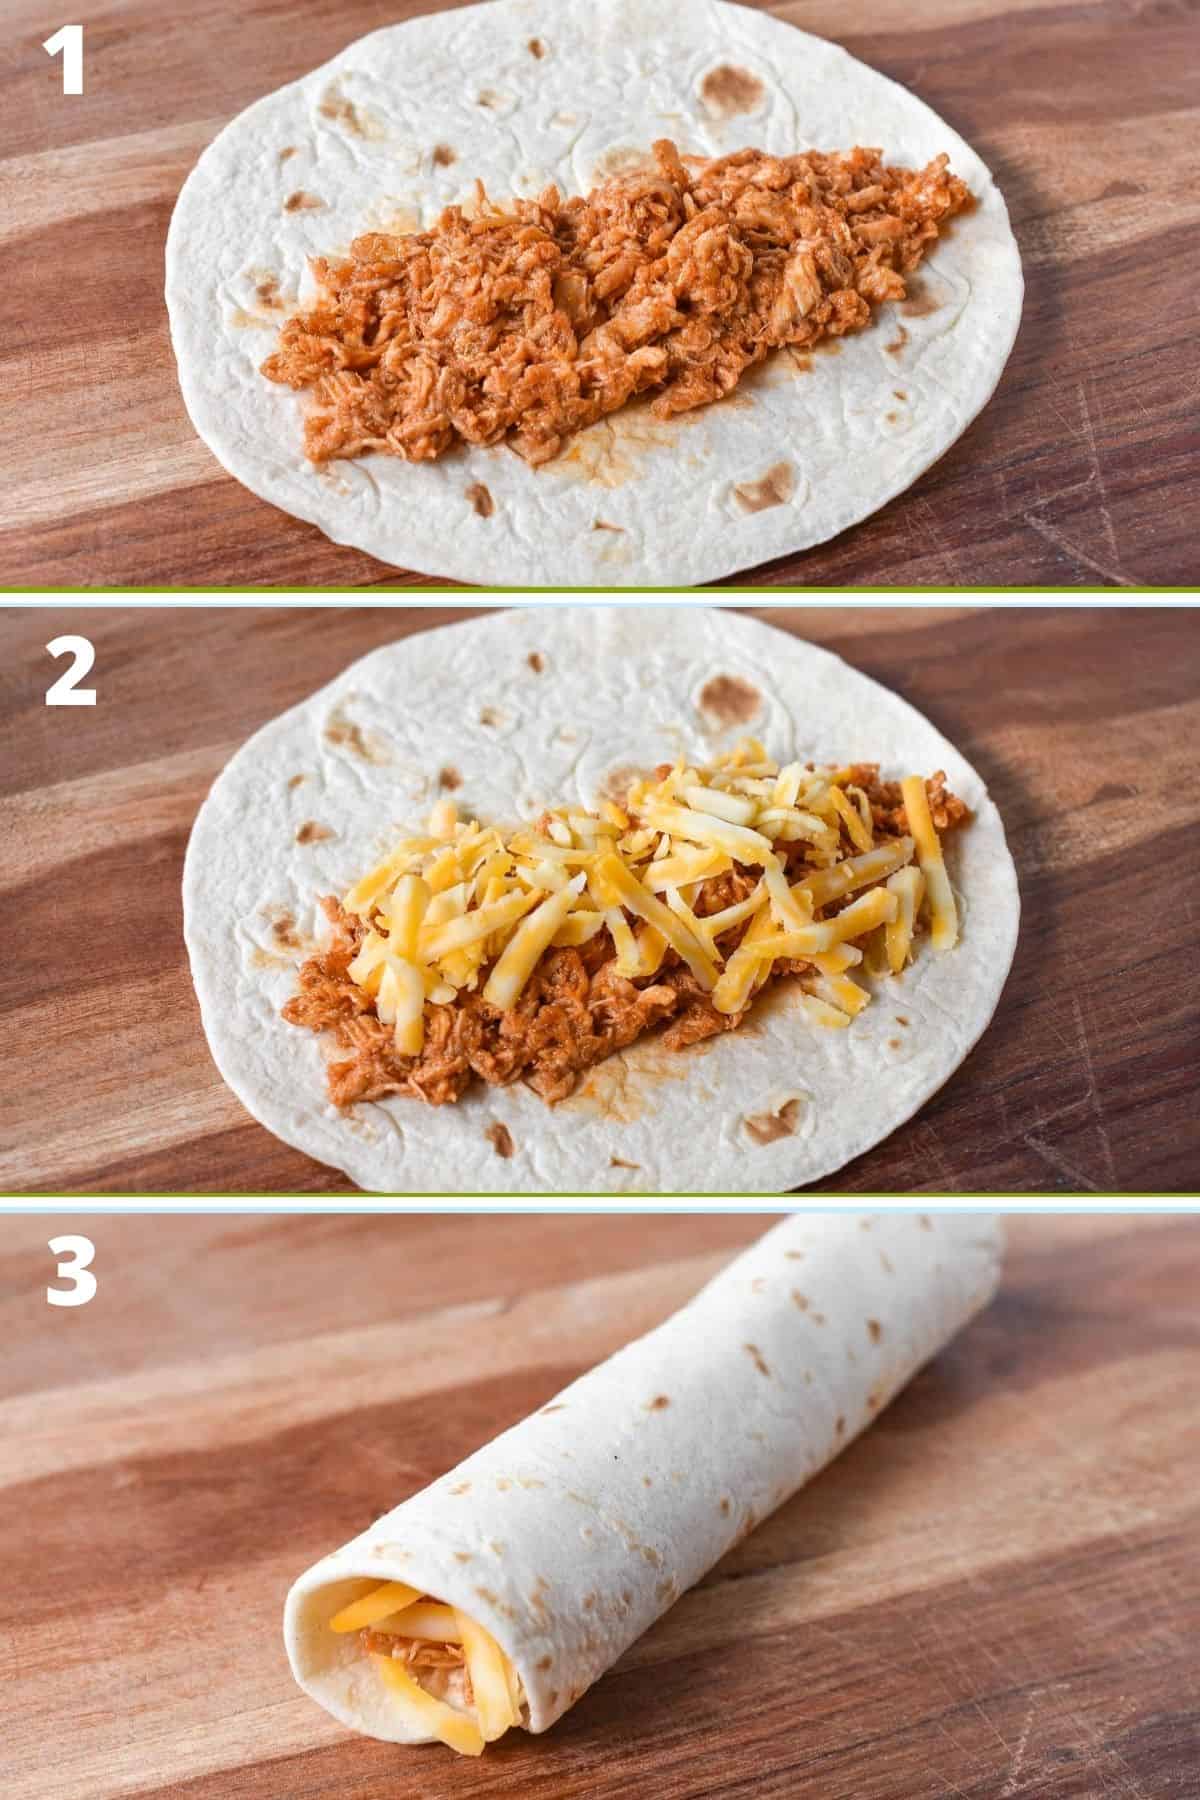 A collage of three pictures showing the steps of making the taquitos.